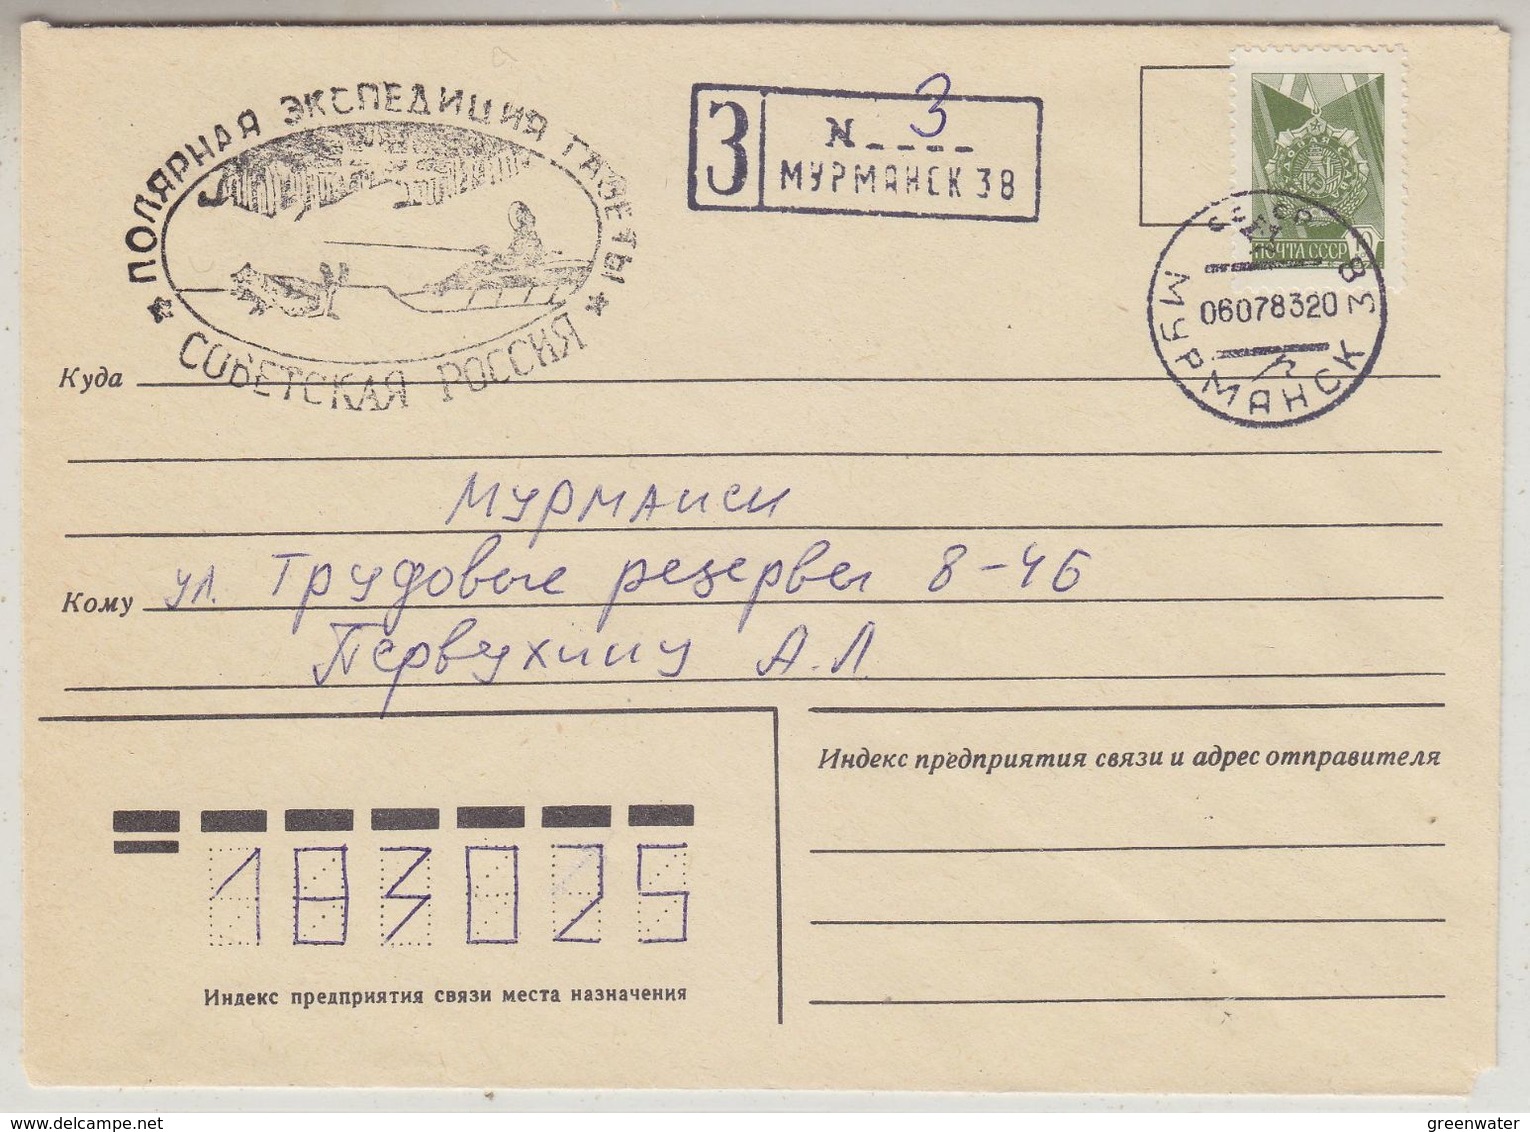 Russia 1978 Sled + Dogs Ca Murmansk 06 07 83 Cover (37675) - Other Means Of Transport